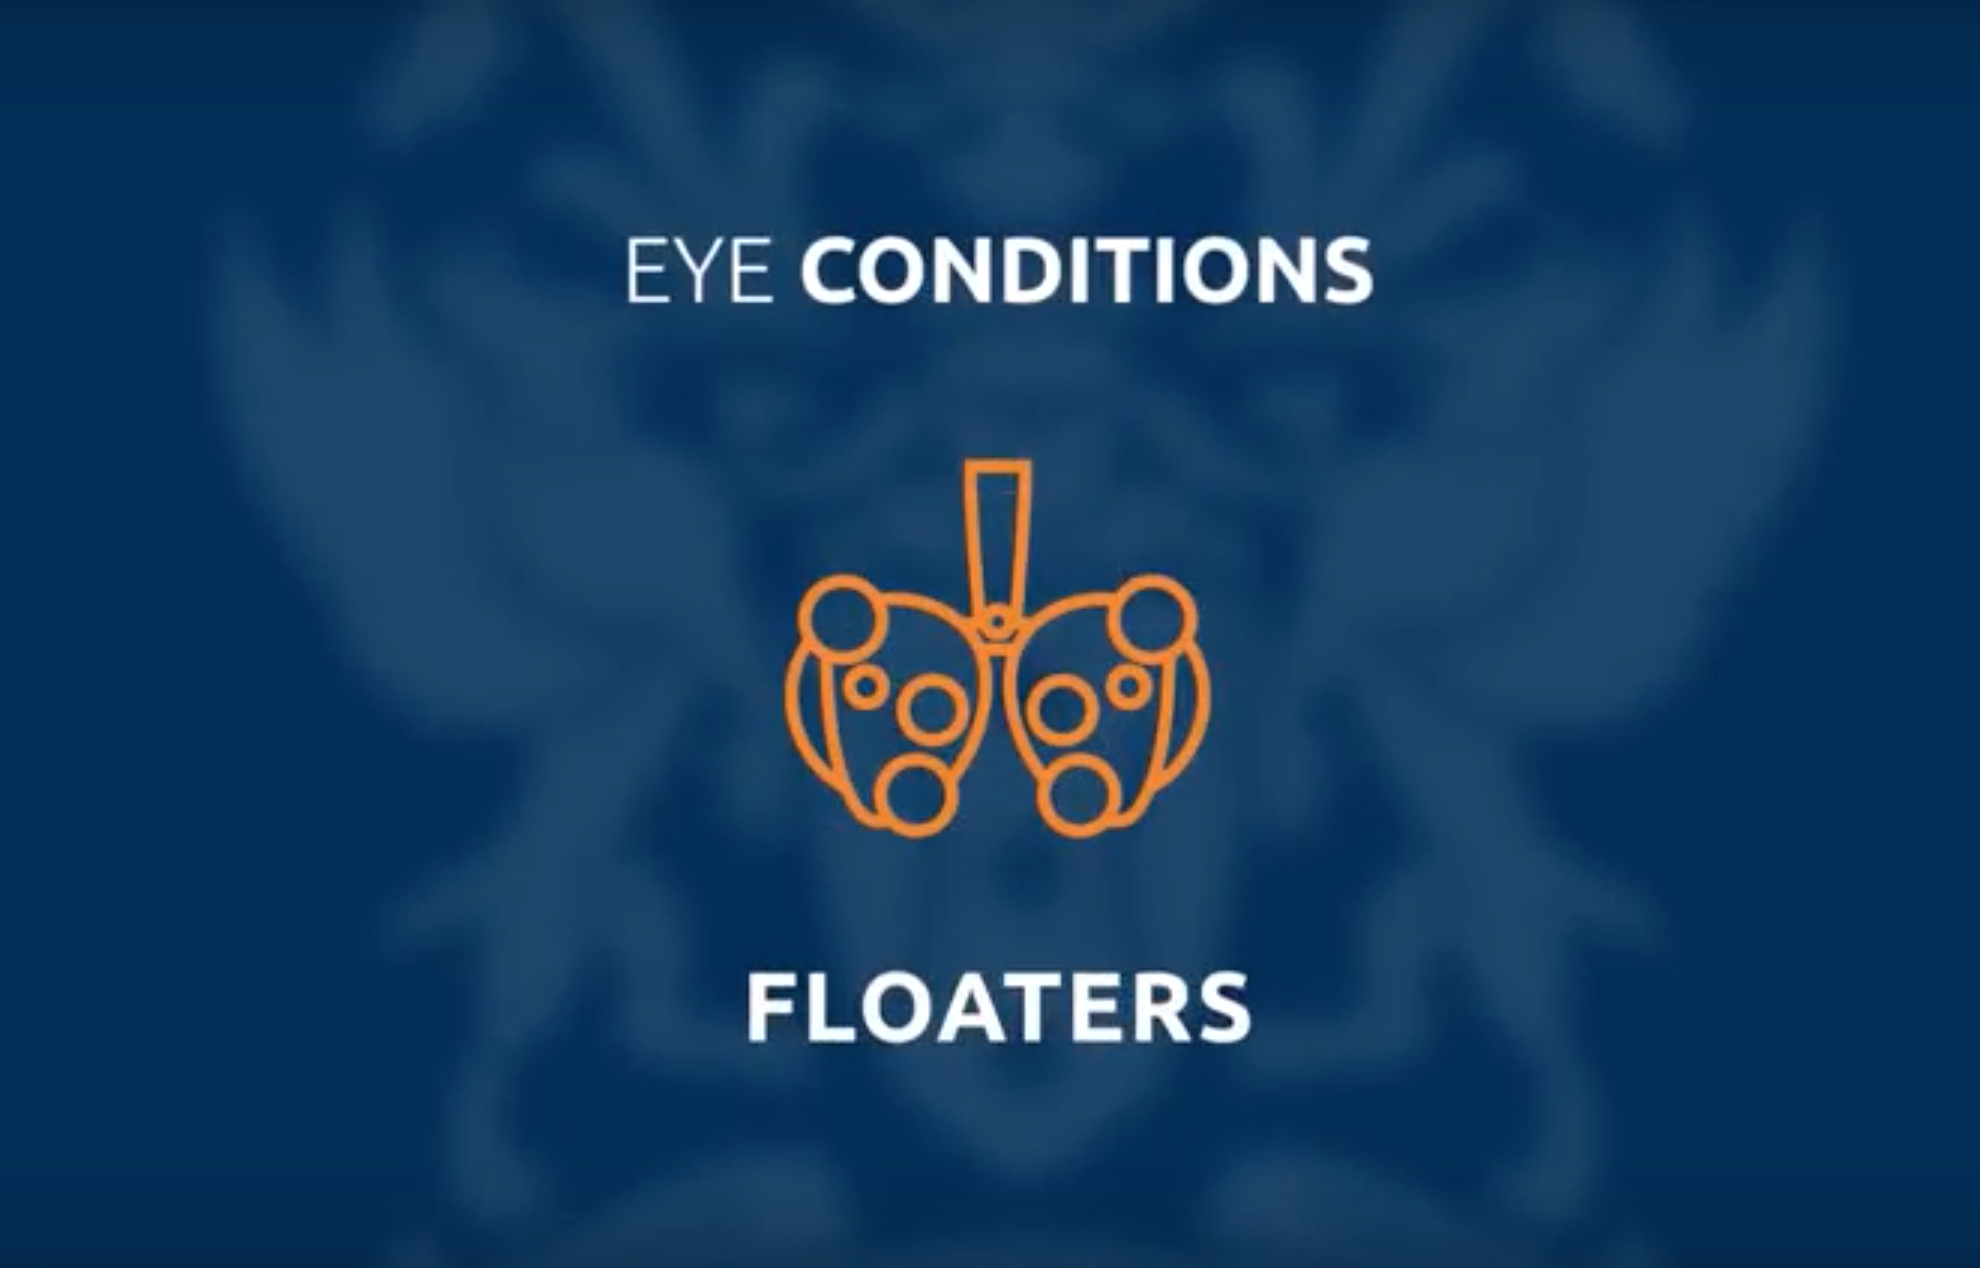 Blink Opticians Video Series: How might floaters effect my vision?